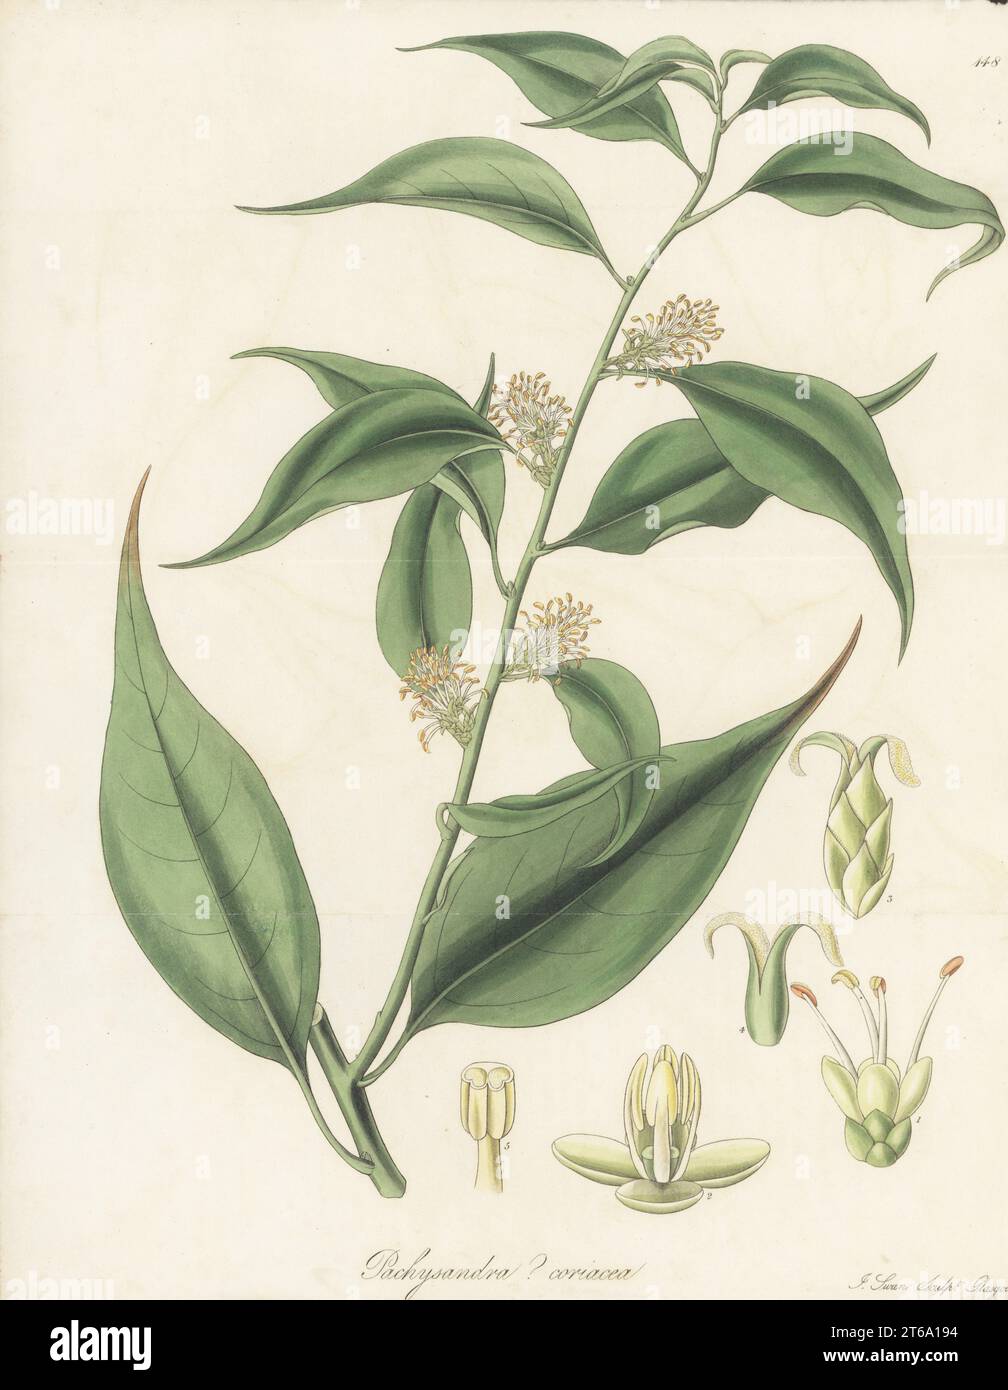 Sweet box or Christmas box, Sarcococca coriacea. Native to India, China and Indo-China, sent from Nepal by botanist Dr. Nathaniel Wallich. Nepaul pachysandra, Pachysandra? coriacea. Handcoloured copperplate engraving by Joseph Swan after a botanical illustration by William Jackson Hooker from his Exotic Flora, William Blackwood, Edinburgh, 1823-27. Stock Photo